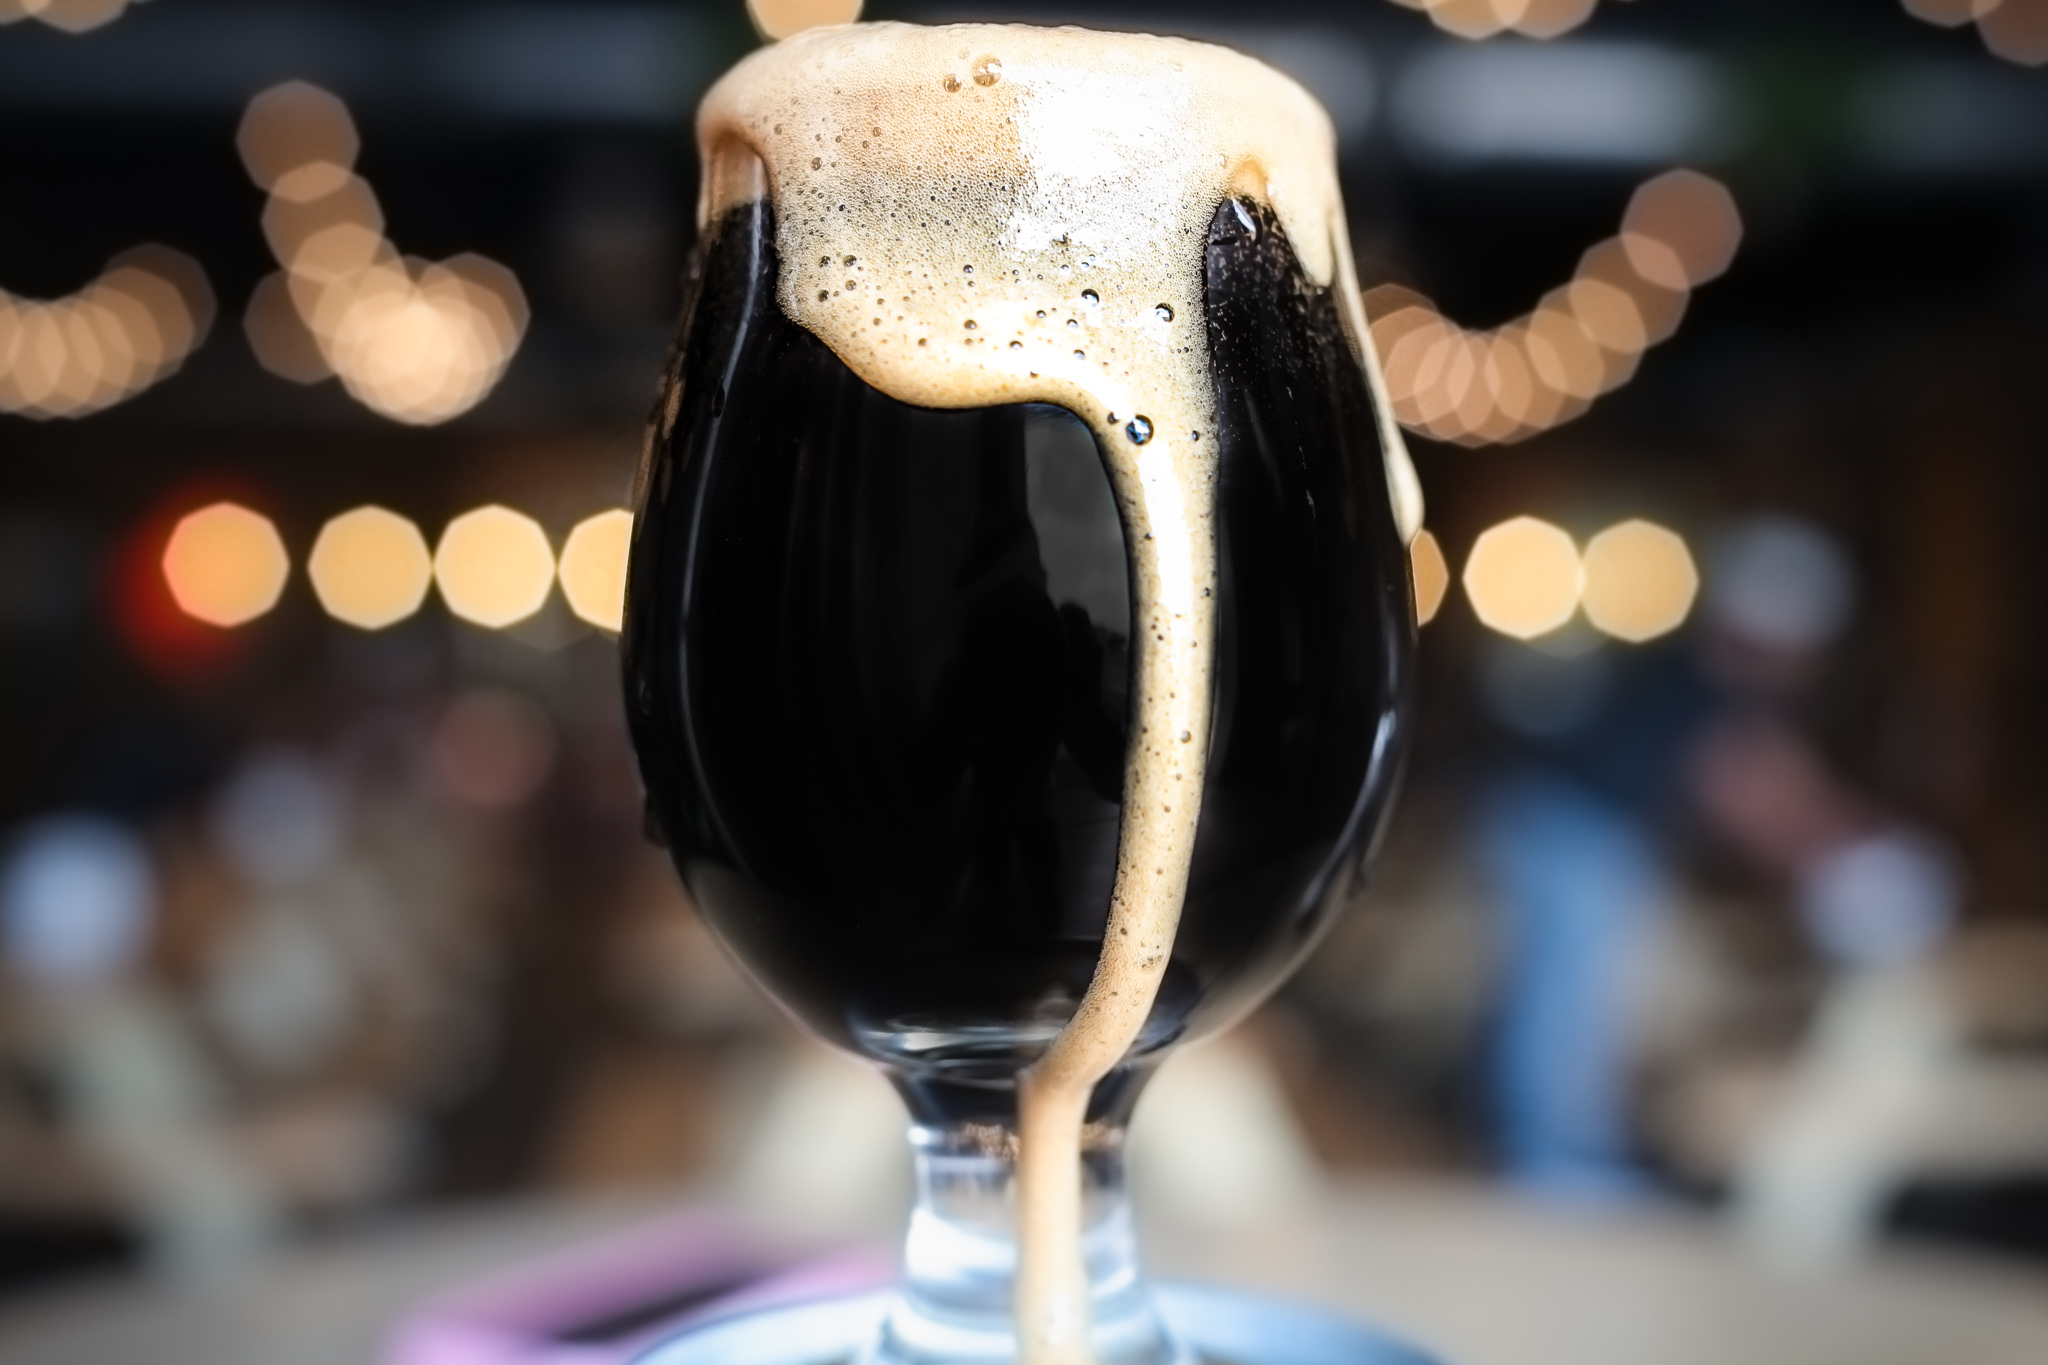 A dark imperial stout overflows out of a tulip shaped beer glass